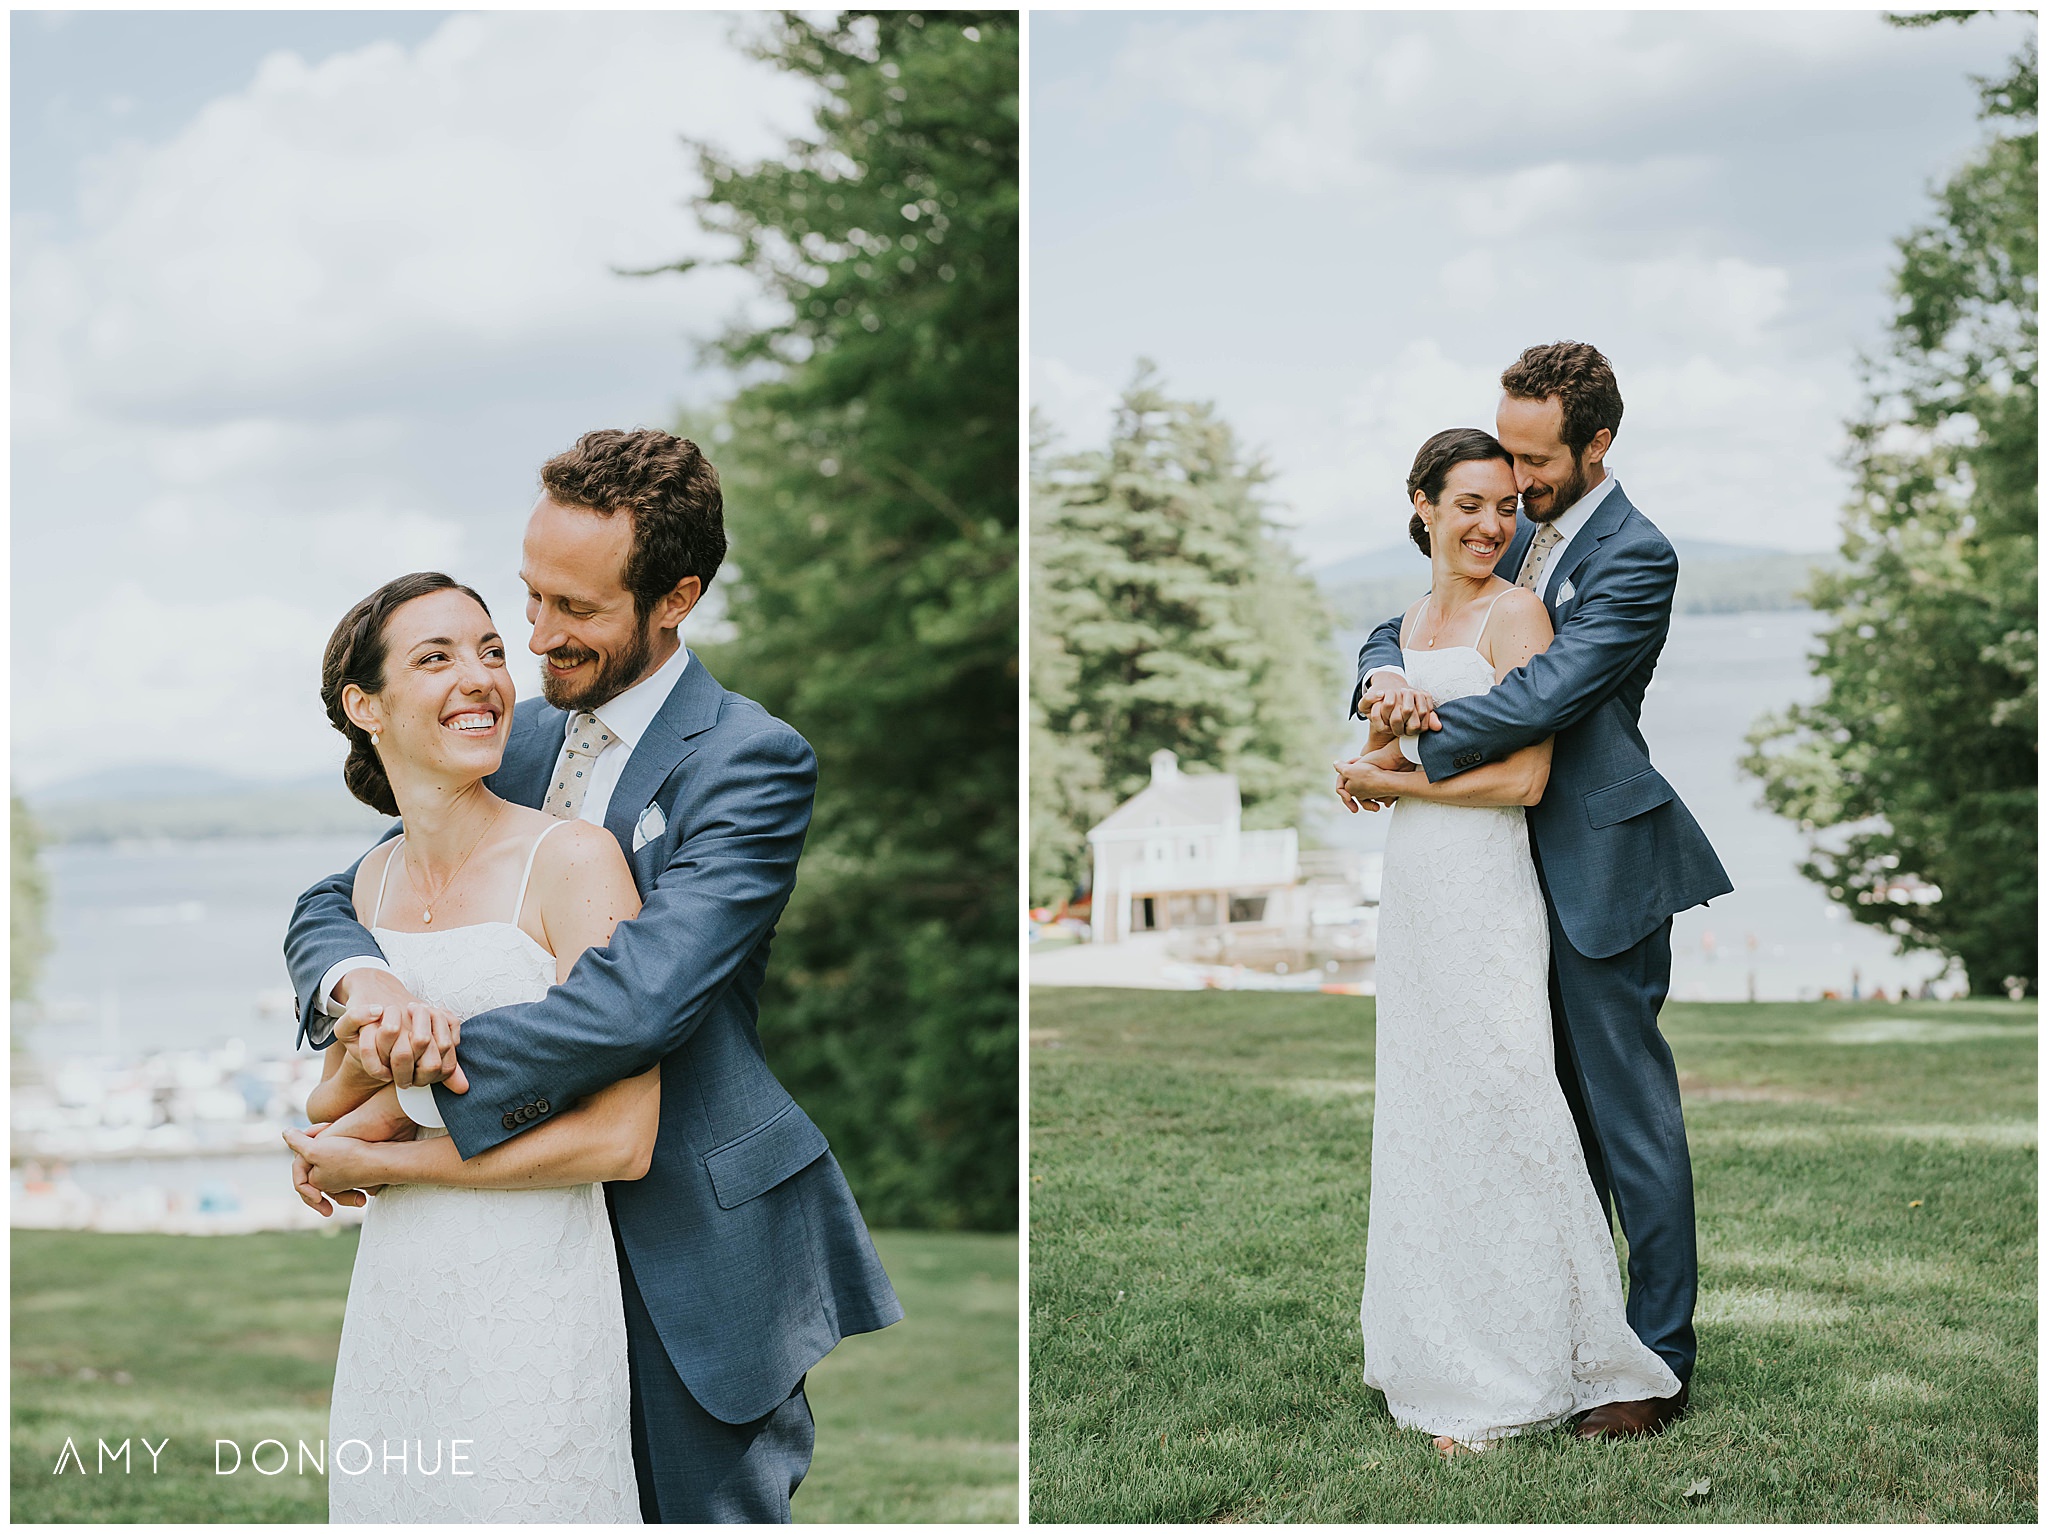 Bride and Groom Portraits |The Fells Estate | New Hampshire Wedding Photographer | © Amy Donohue Photography